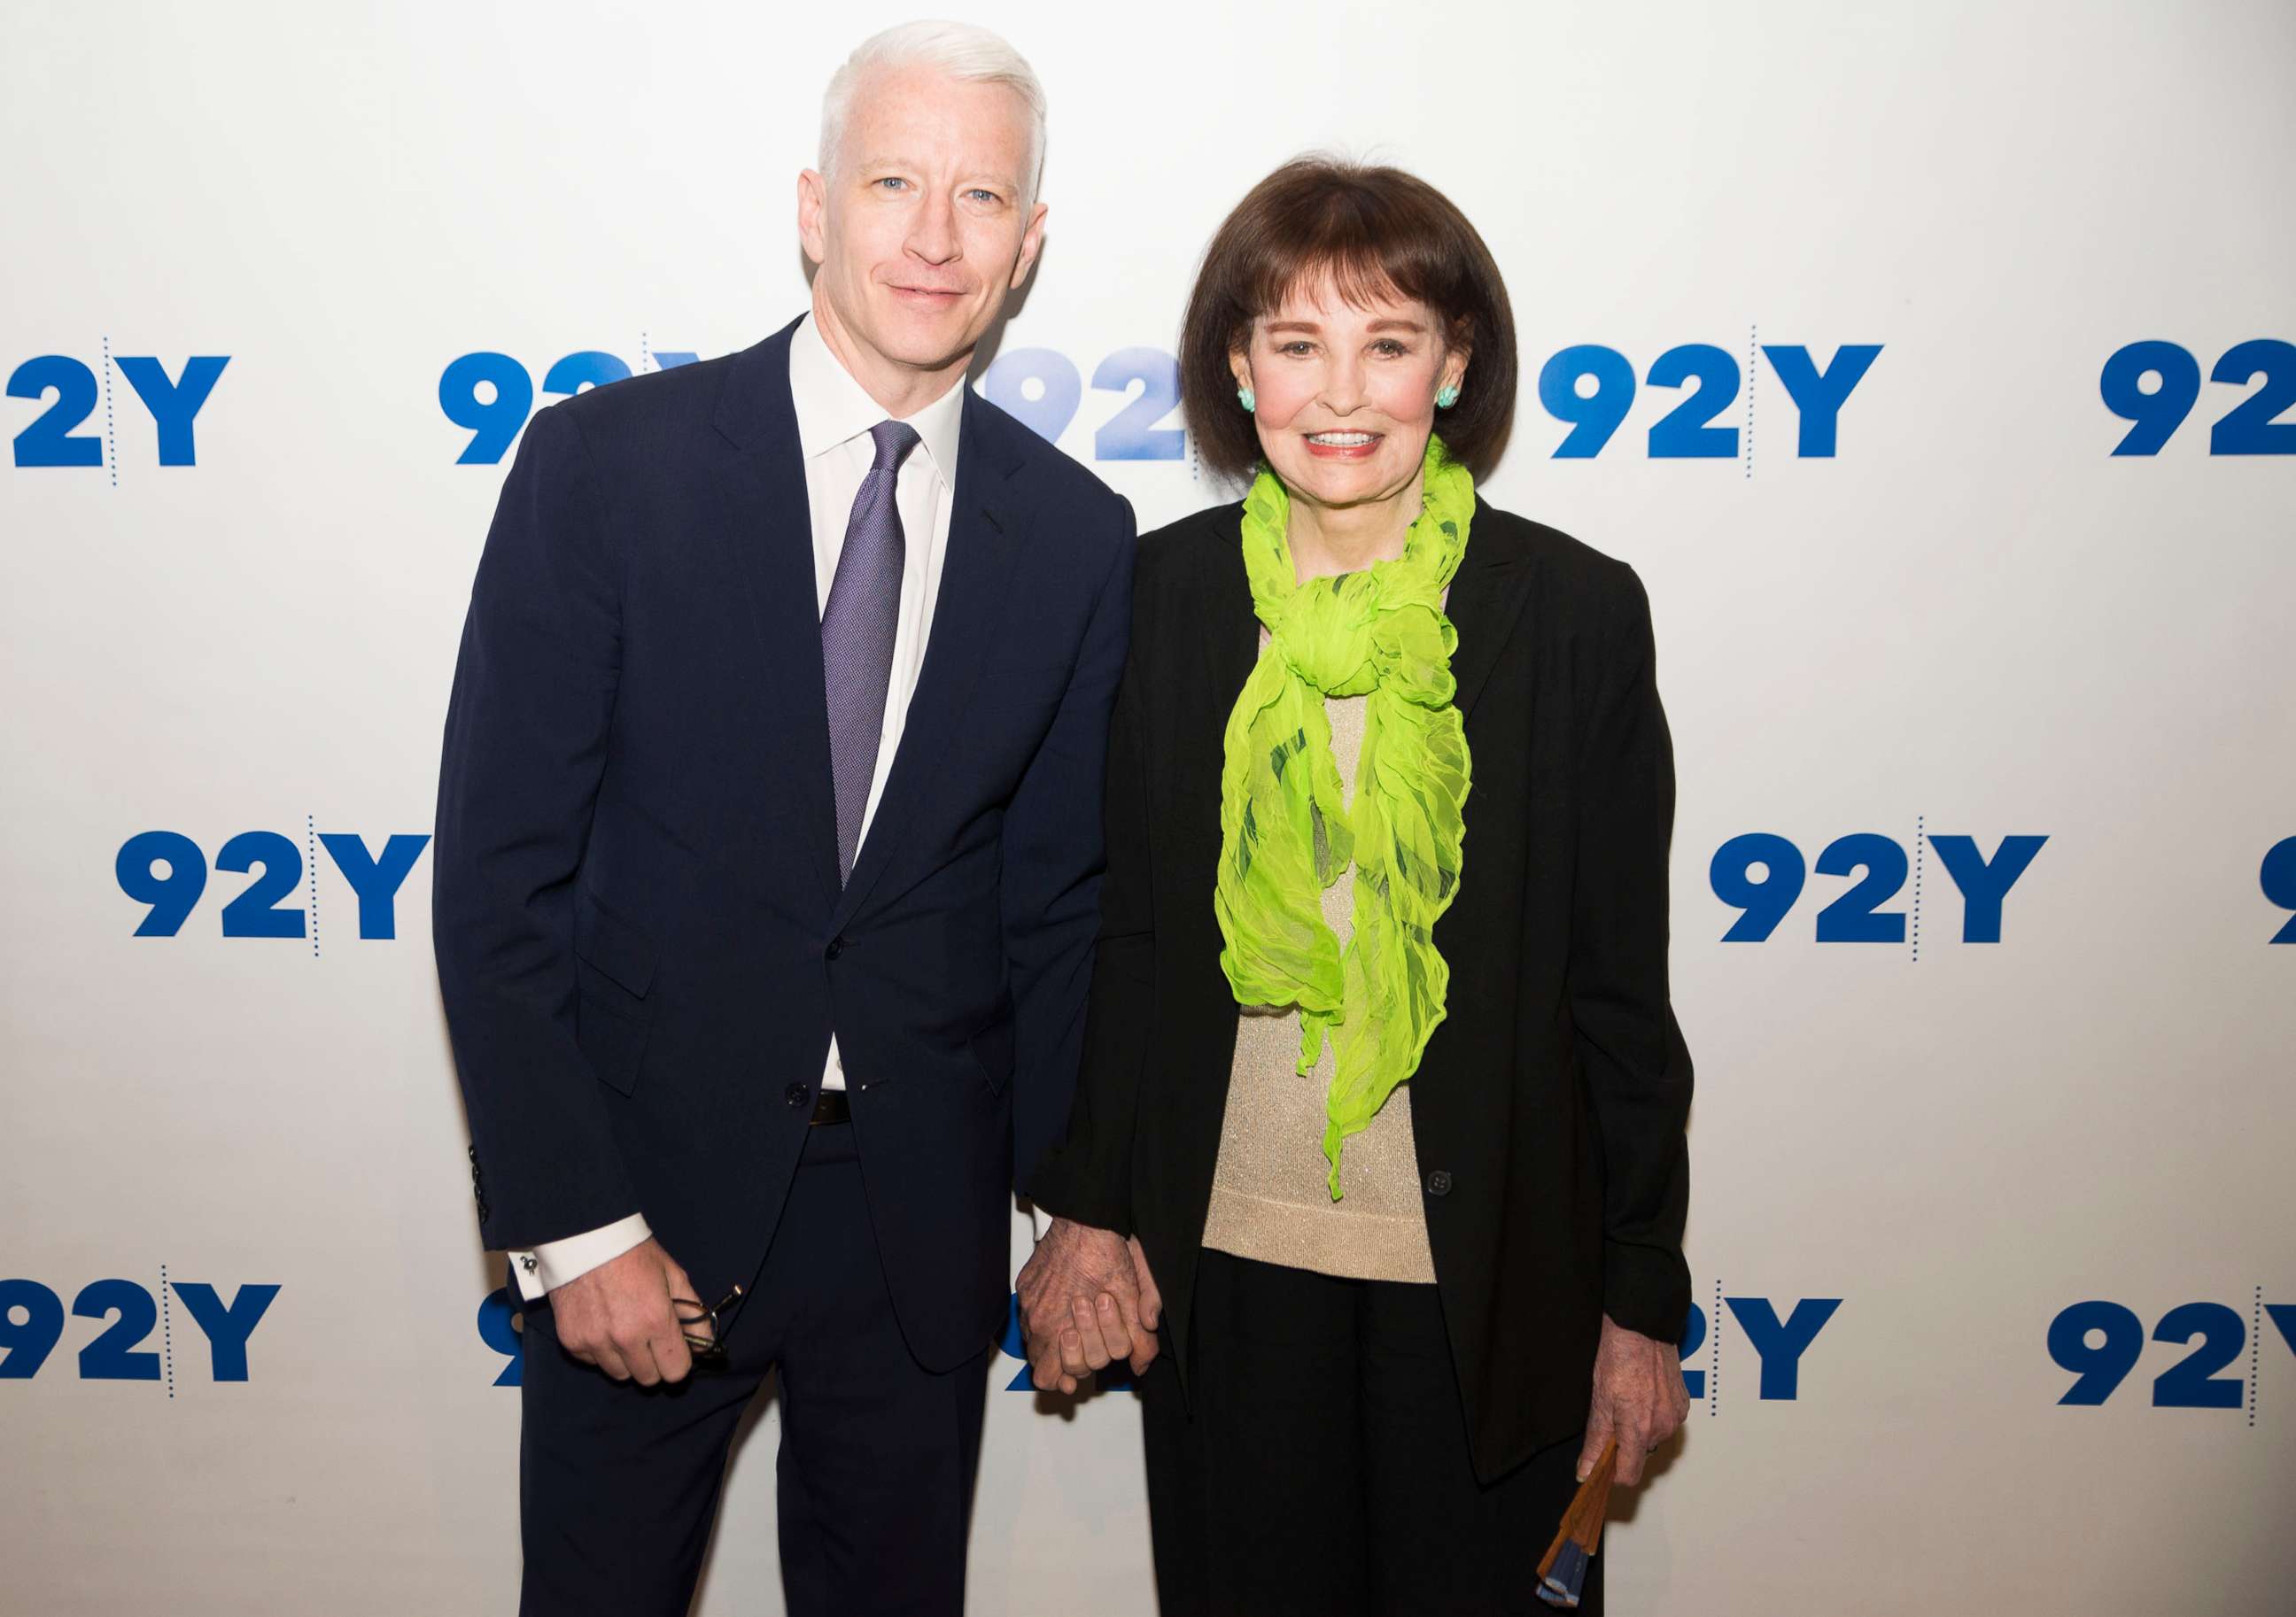 PHOTO: Anderson Cooper and Gloria Vanderbilt at 92Y on April 14, 2016 in New York City.